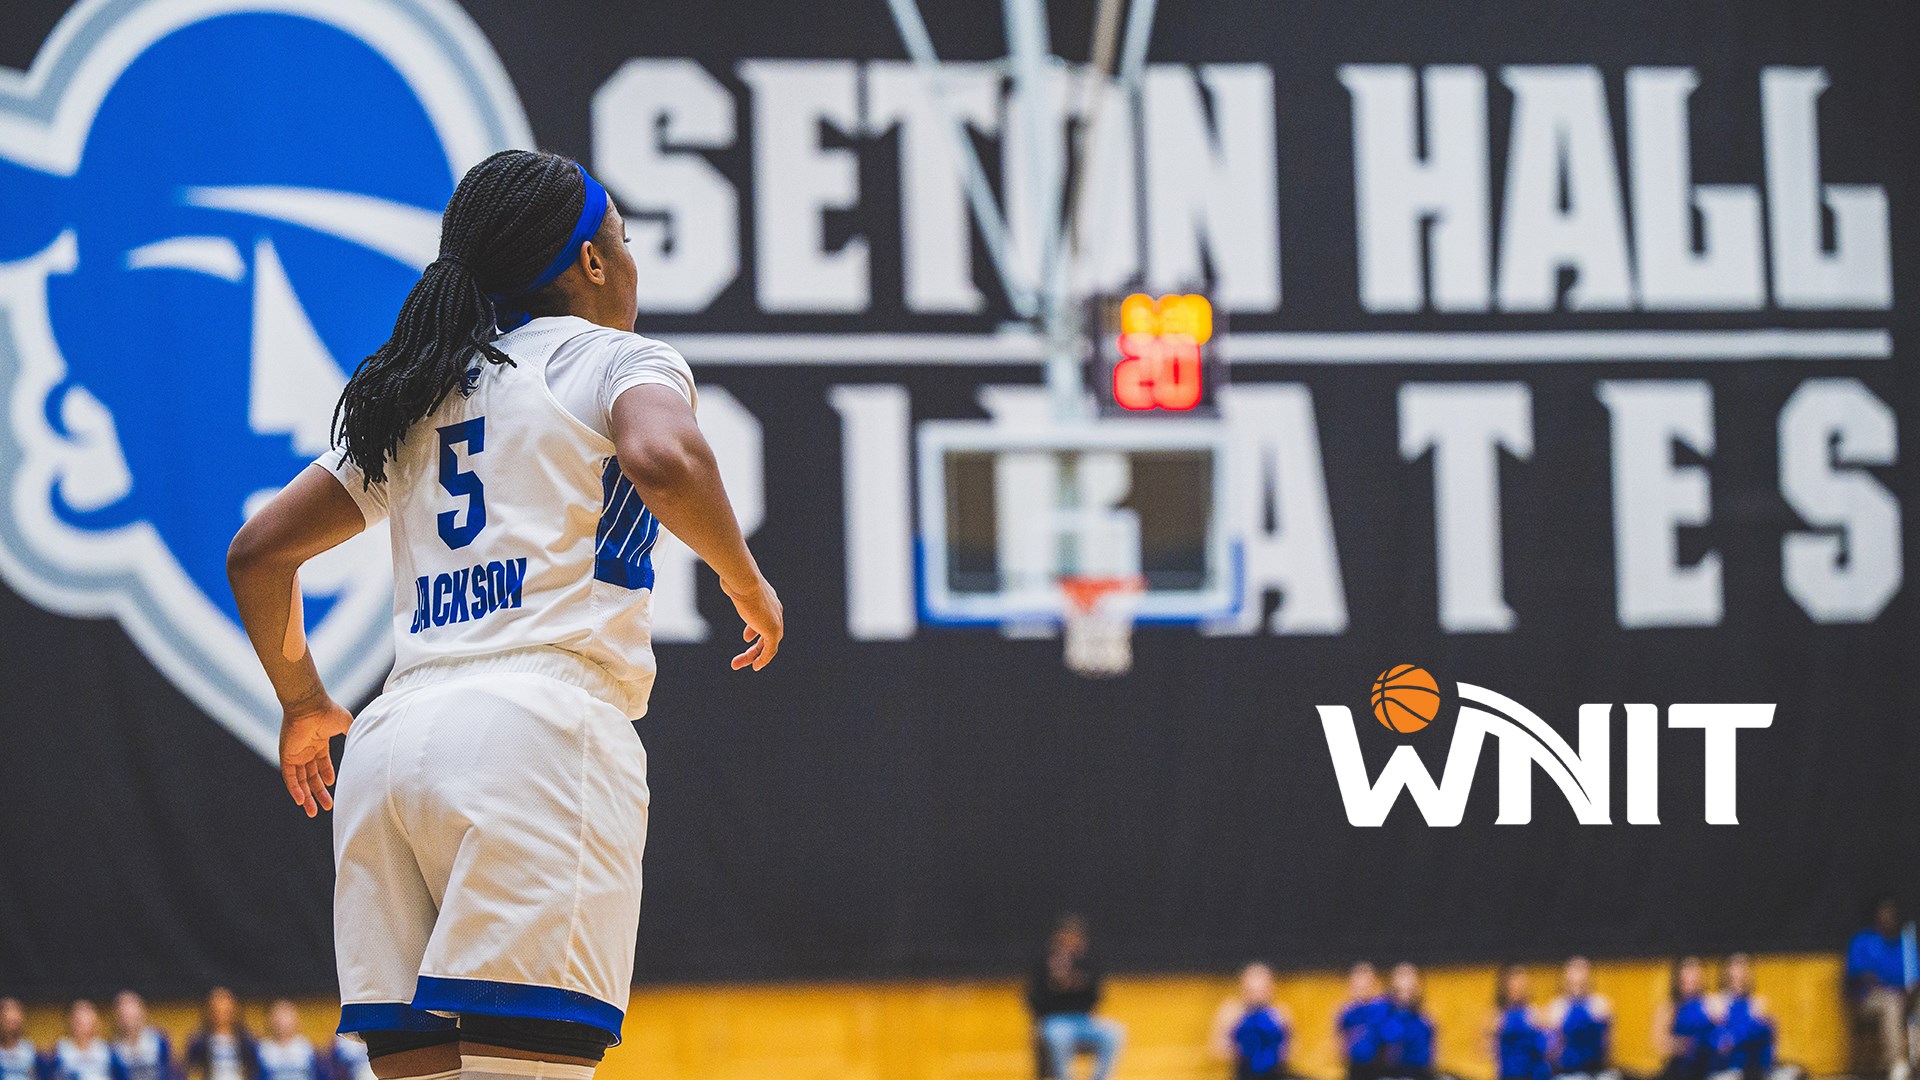 Seton Hall's Mya Jackson stands on the court during a home WNIT game.